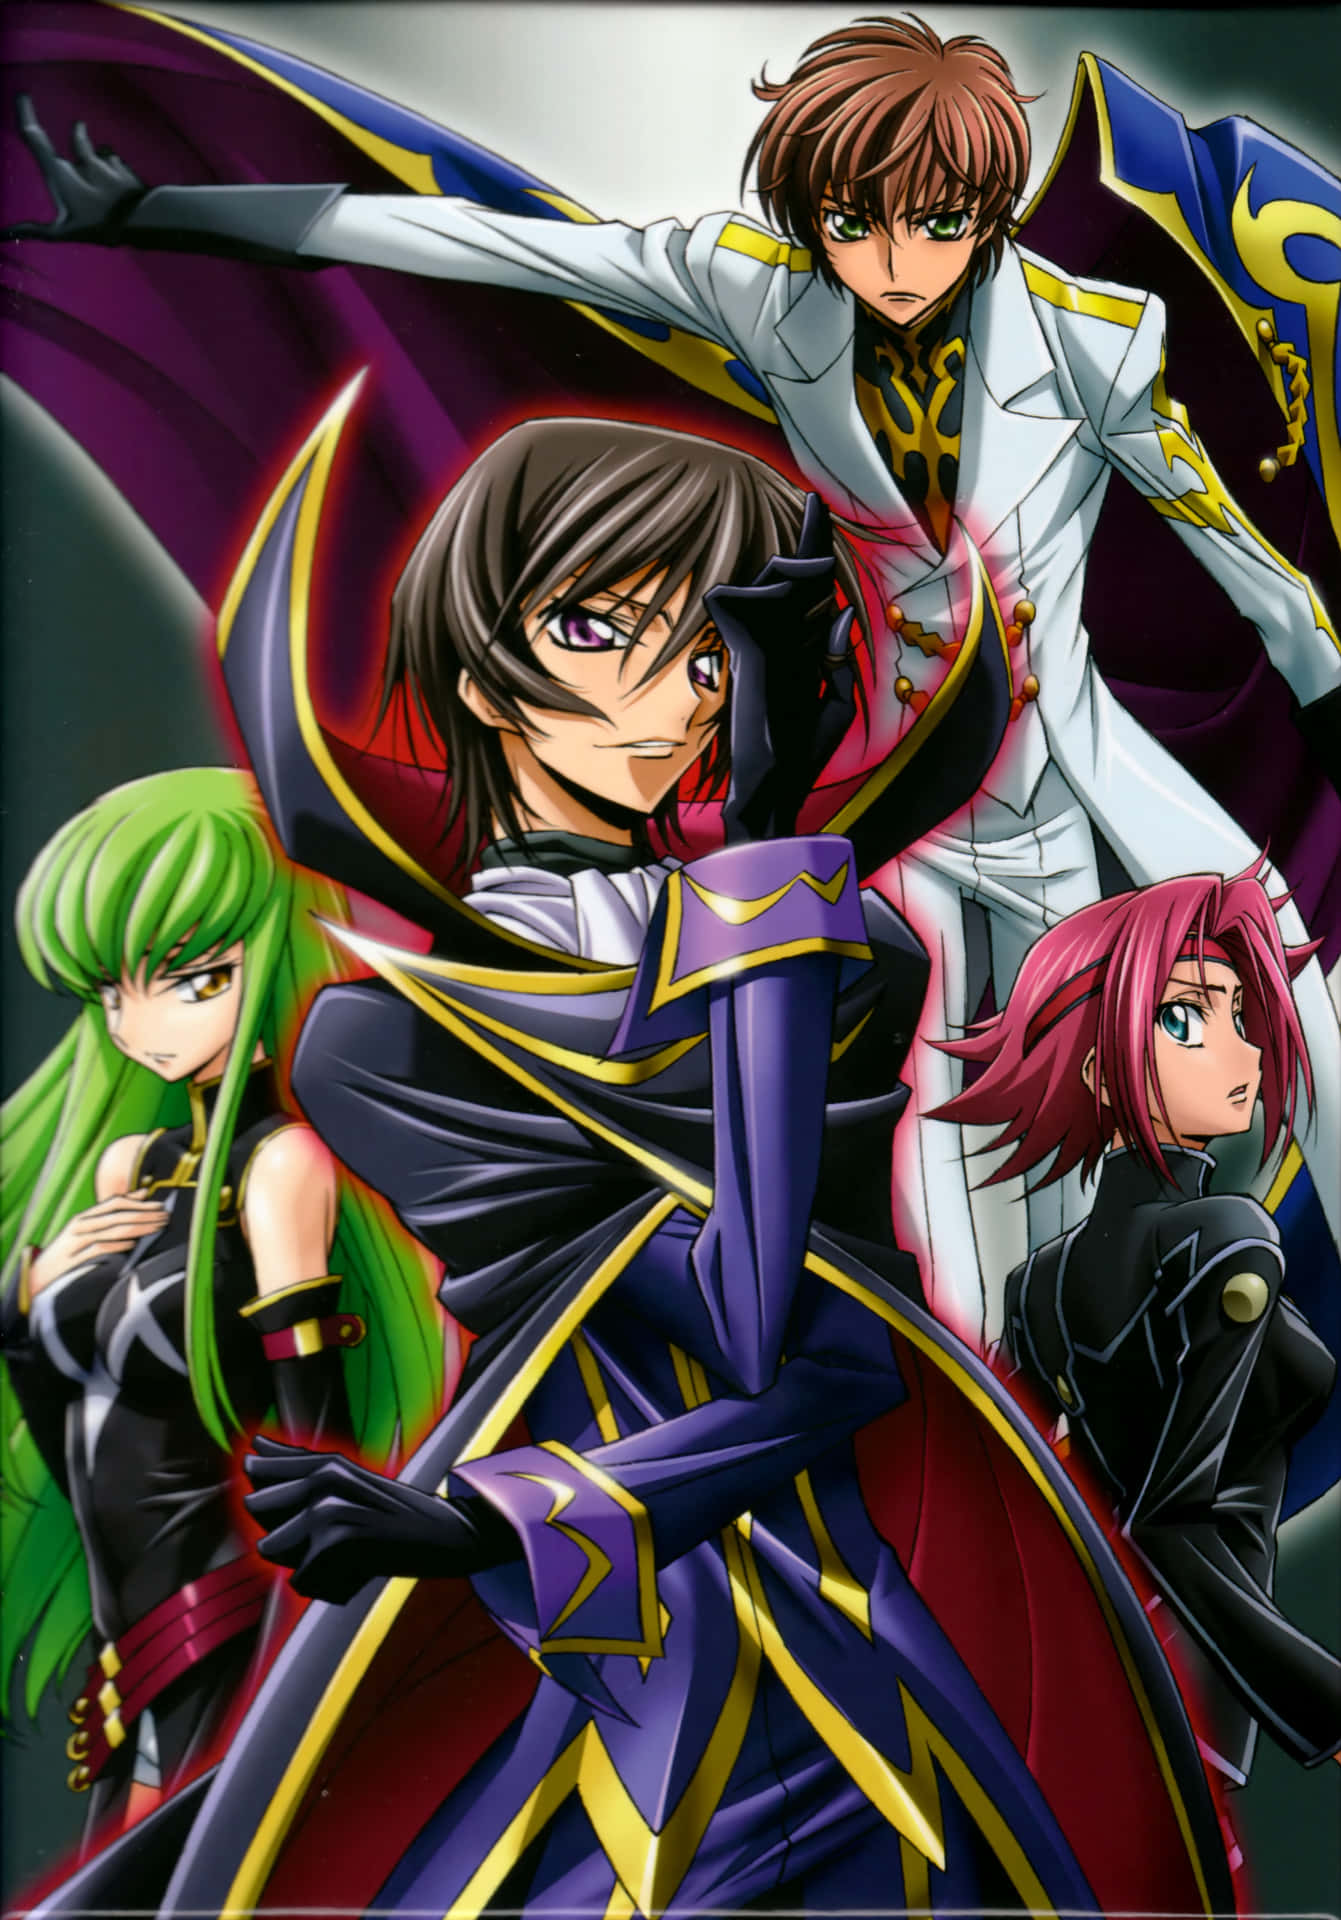 Lelouch Lamperouge, The Protagonist Of Code Geass, Plotting His Next Move